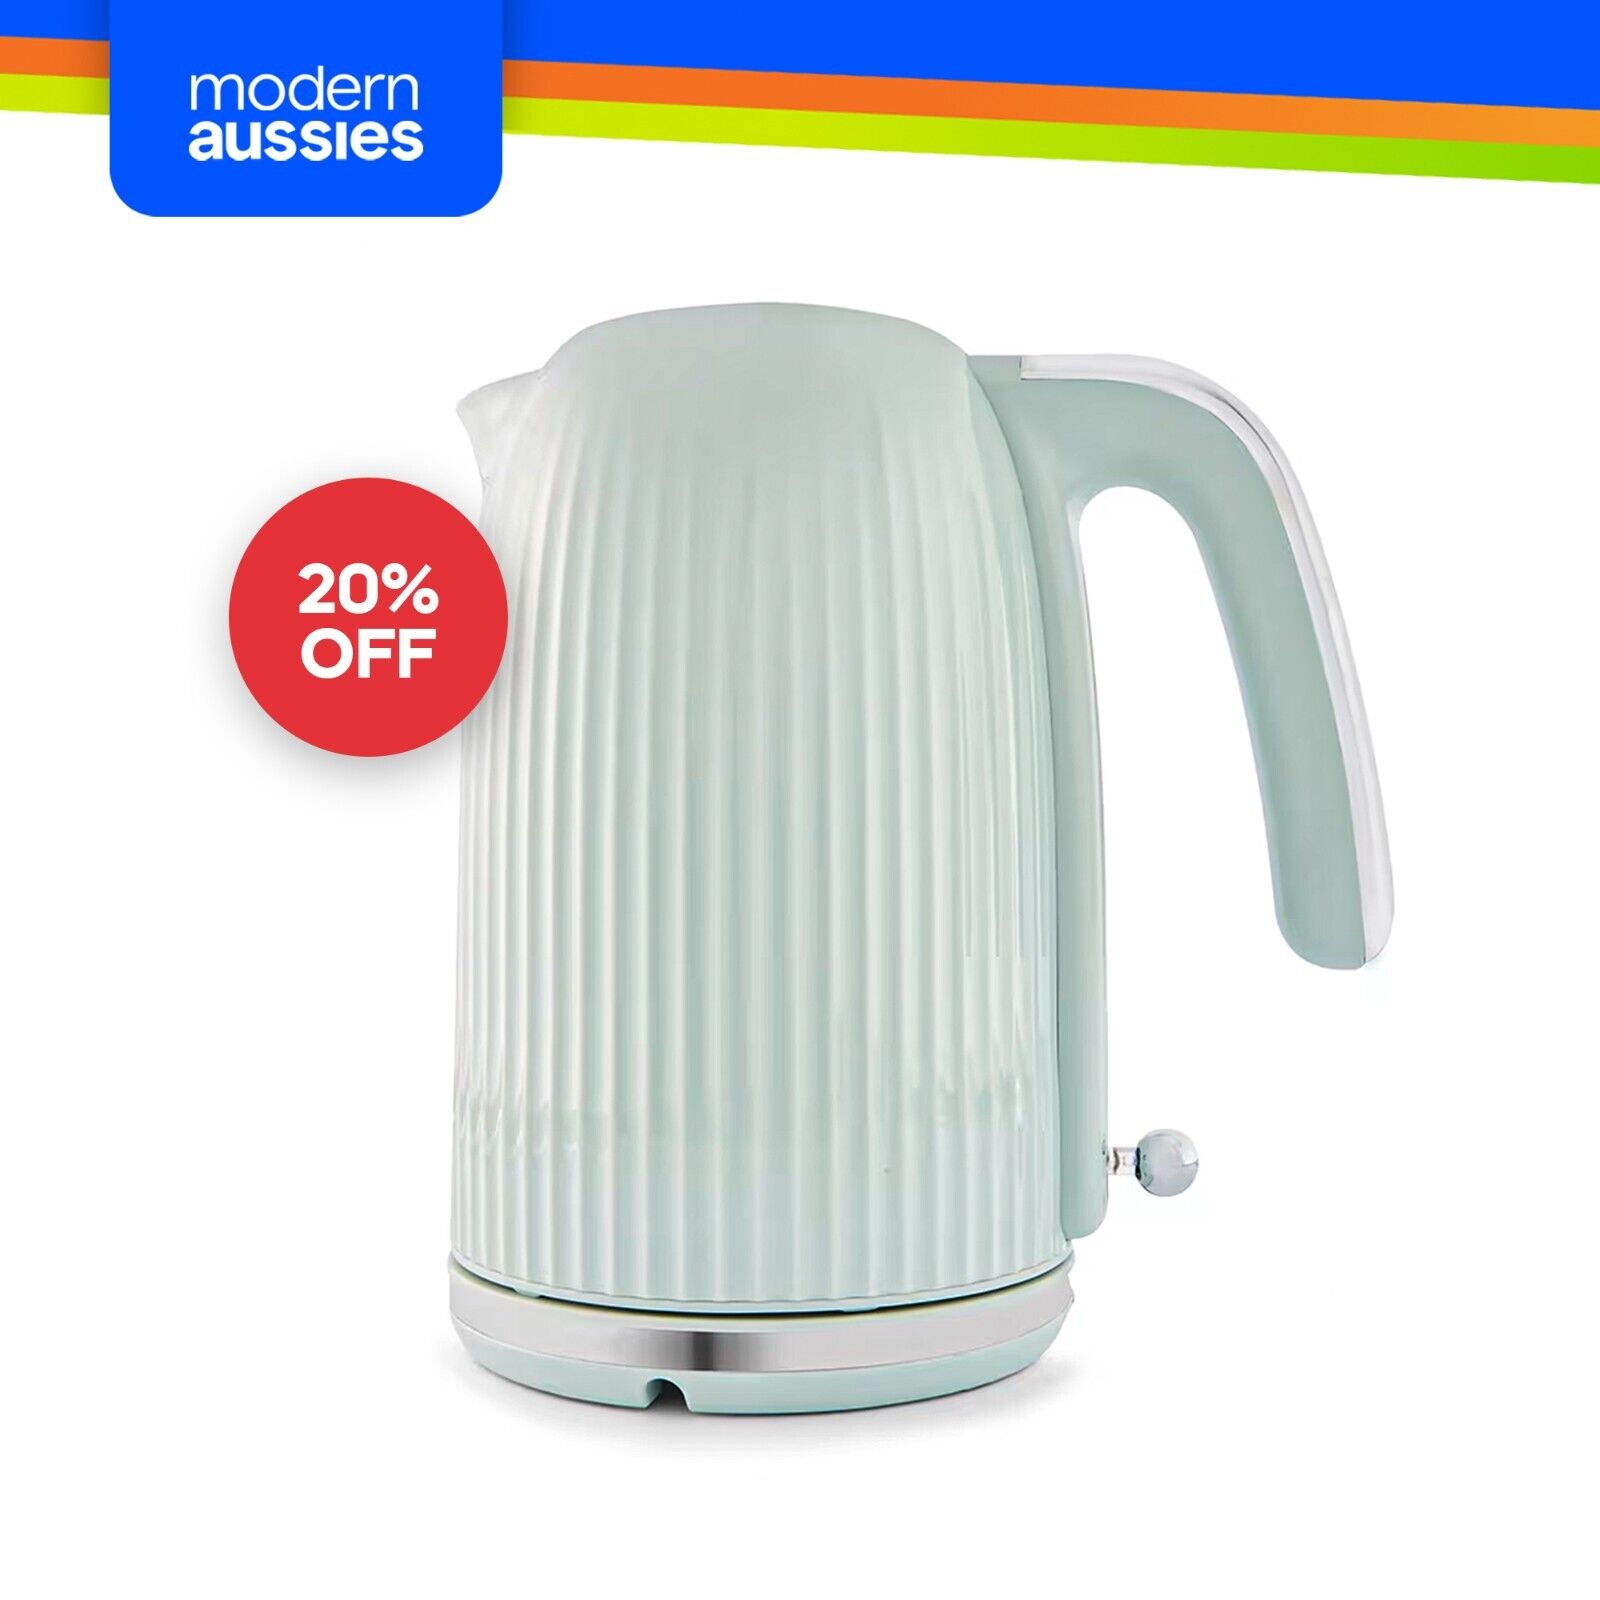 Stainless Steel Cordless Retro Electric Kettle Ribbed Design Green 1.7L